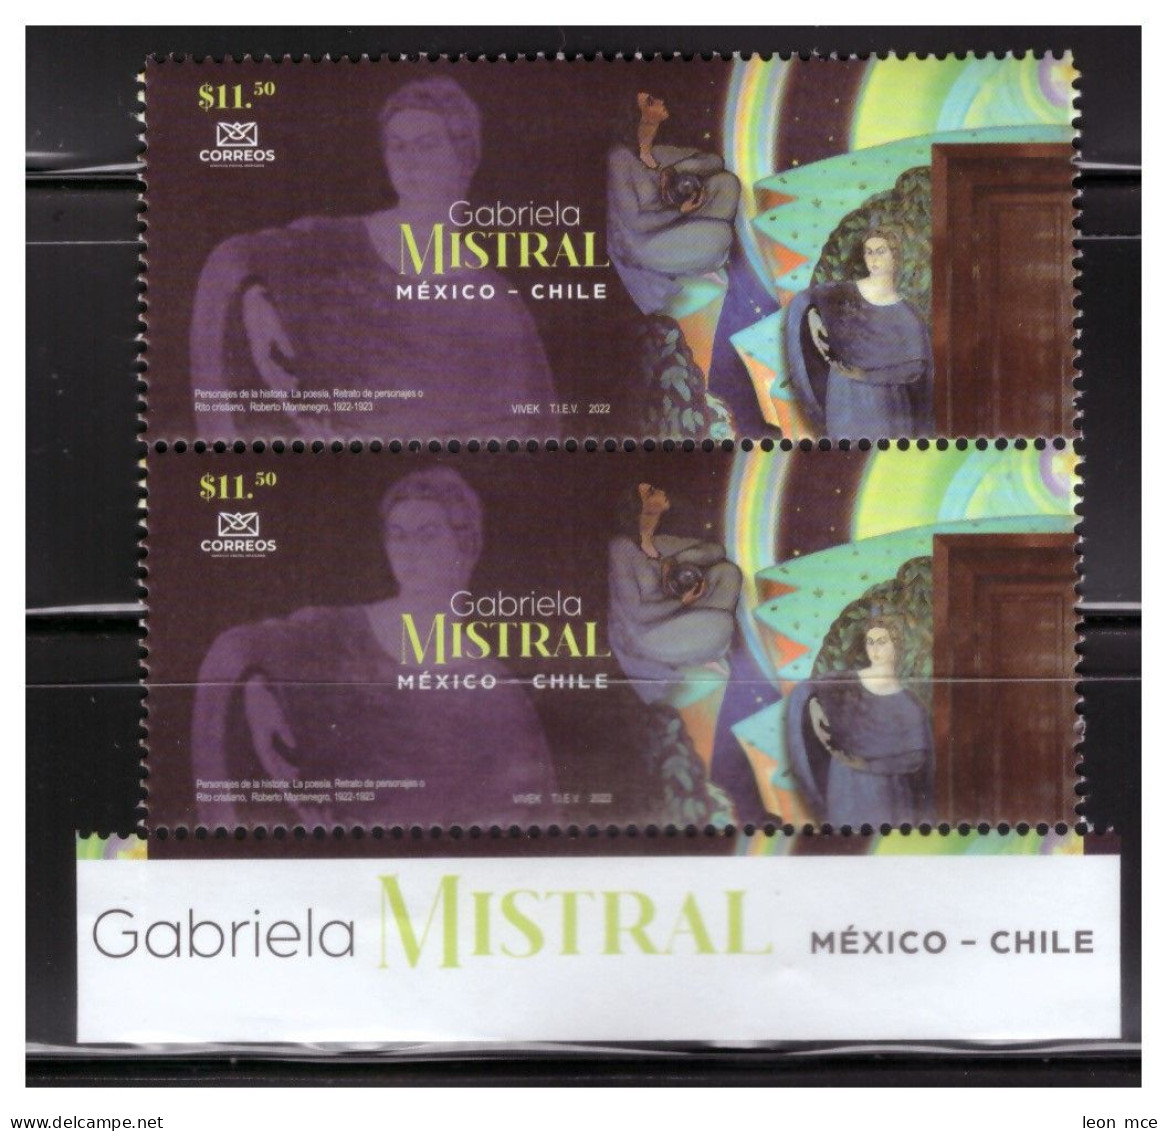 2022 MÉXICO - CHILE "Gabriela Mistral", EMISIÓN CONJUNTA, Writer, Joint Issue, 2 STAMPS WITH LEGEND MNH - Mexiko